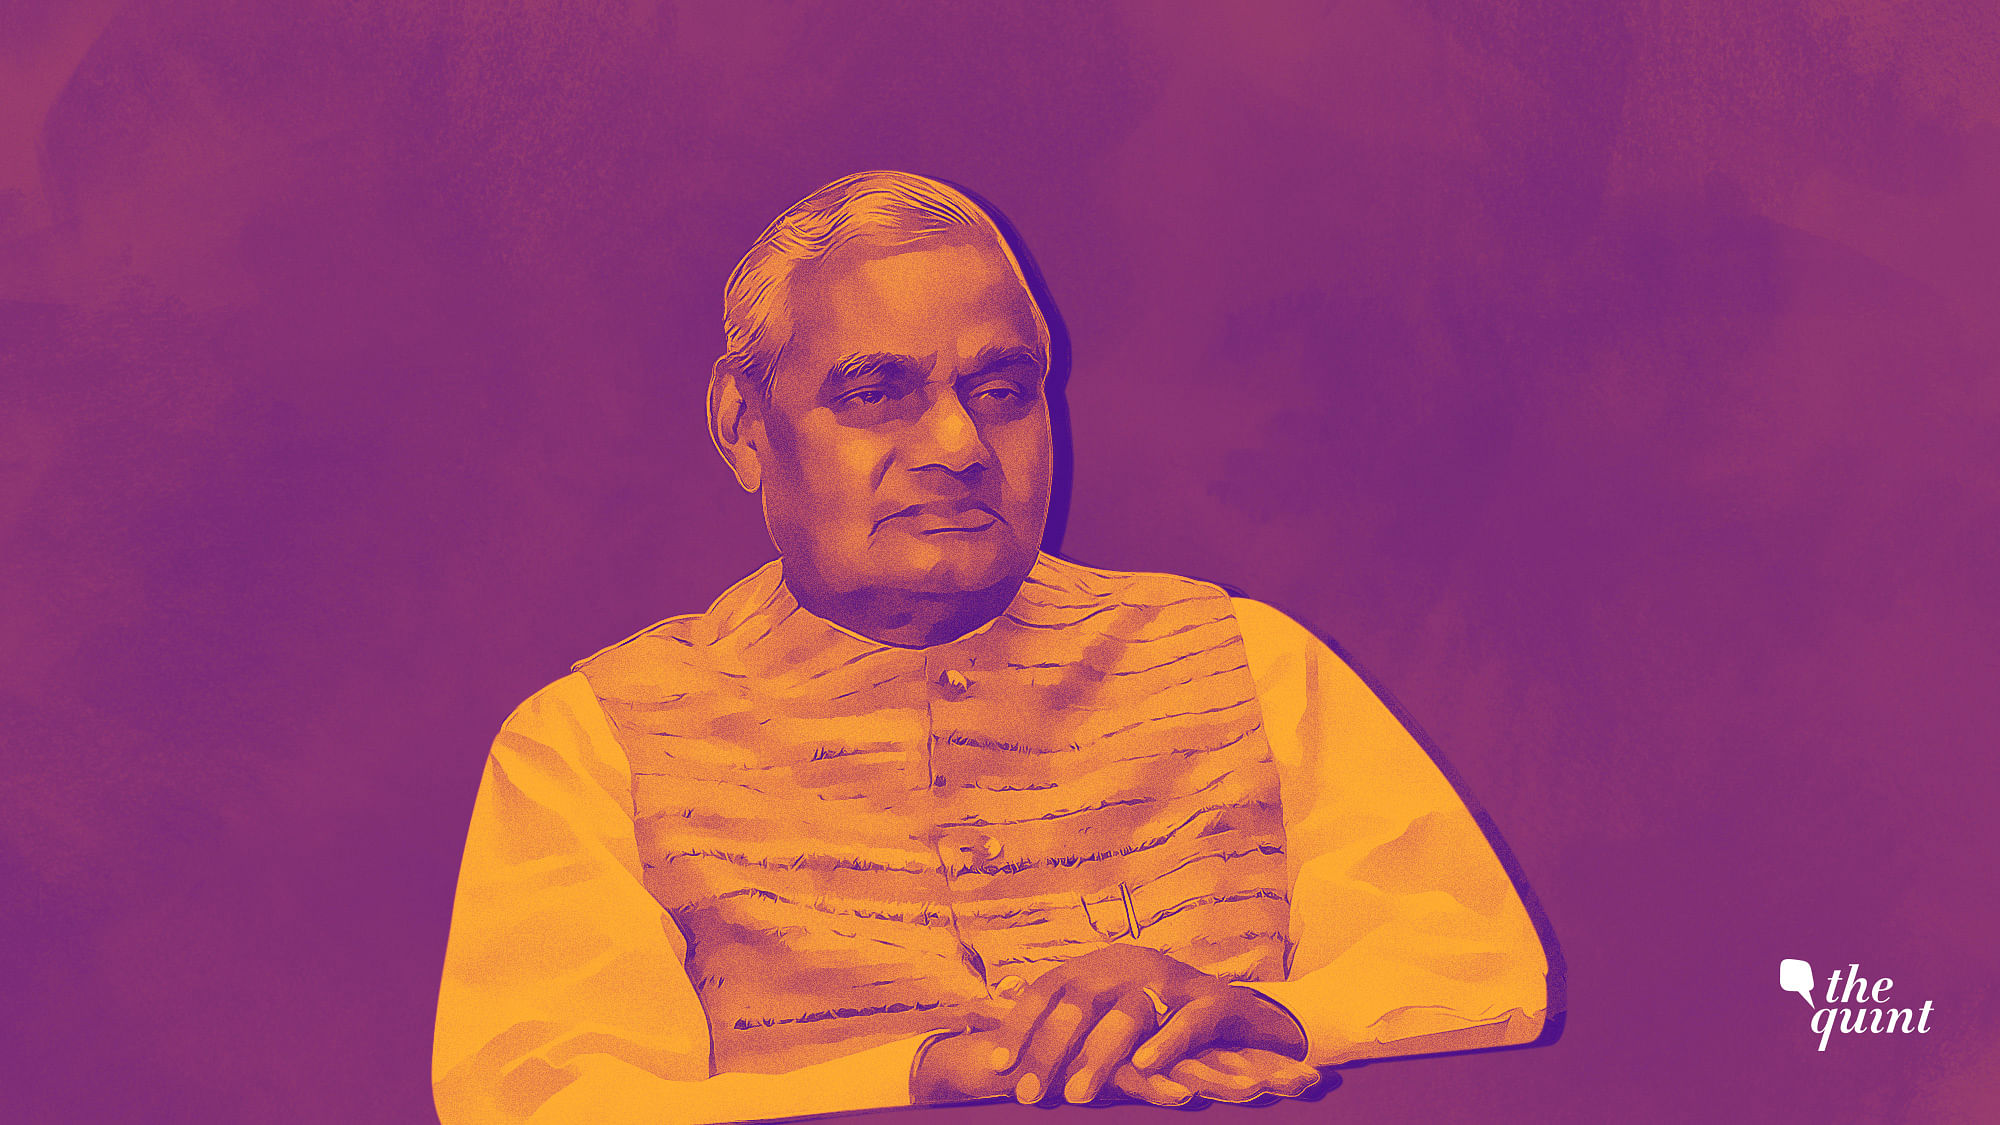 Atal Bihari Vajpayee was one of India’s most beloved prime ministers, and the first non-Congress prime minister to complete a five-year term.